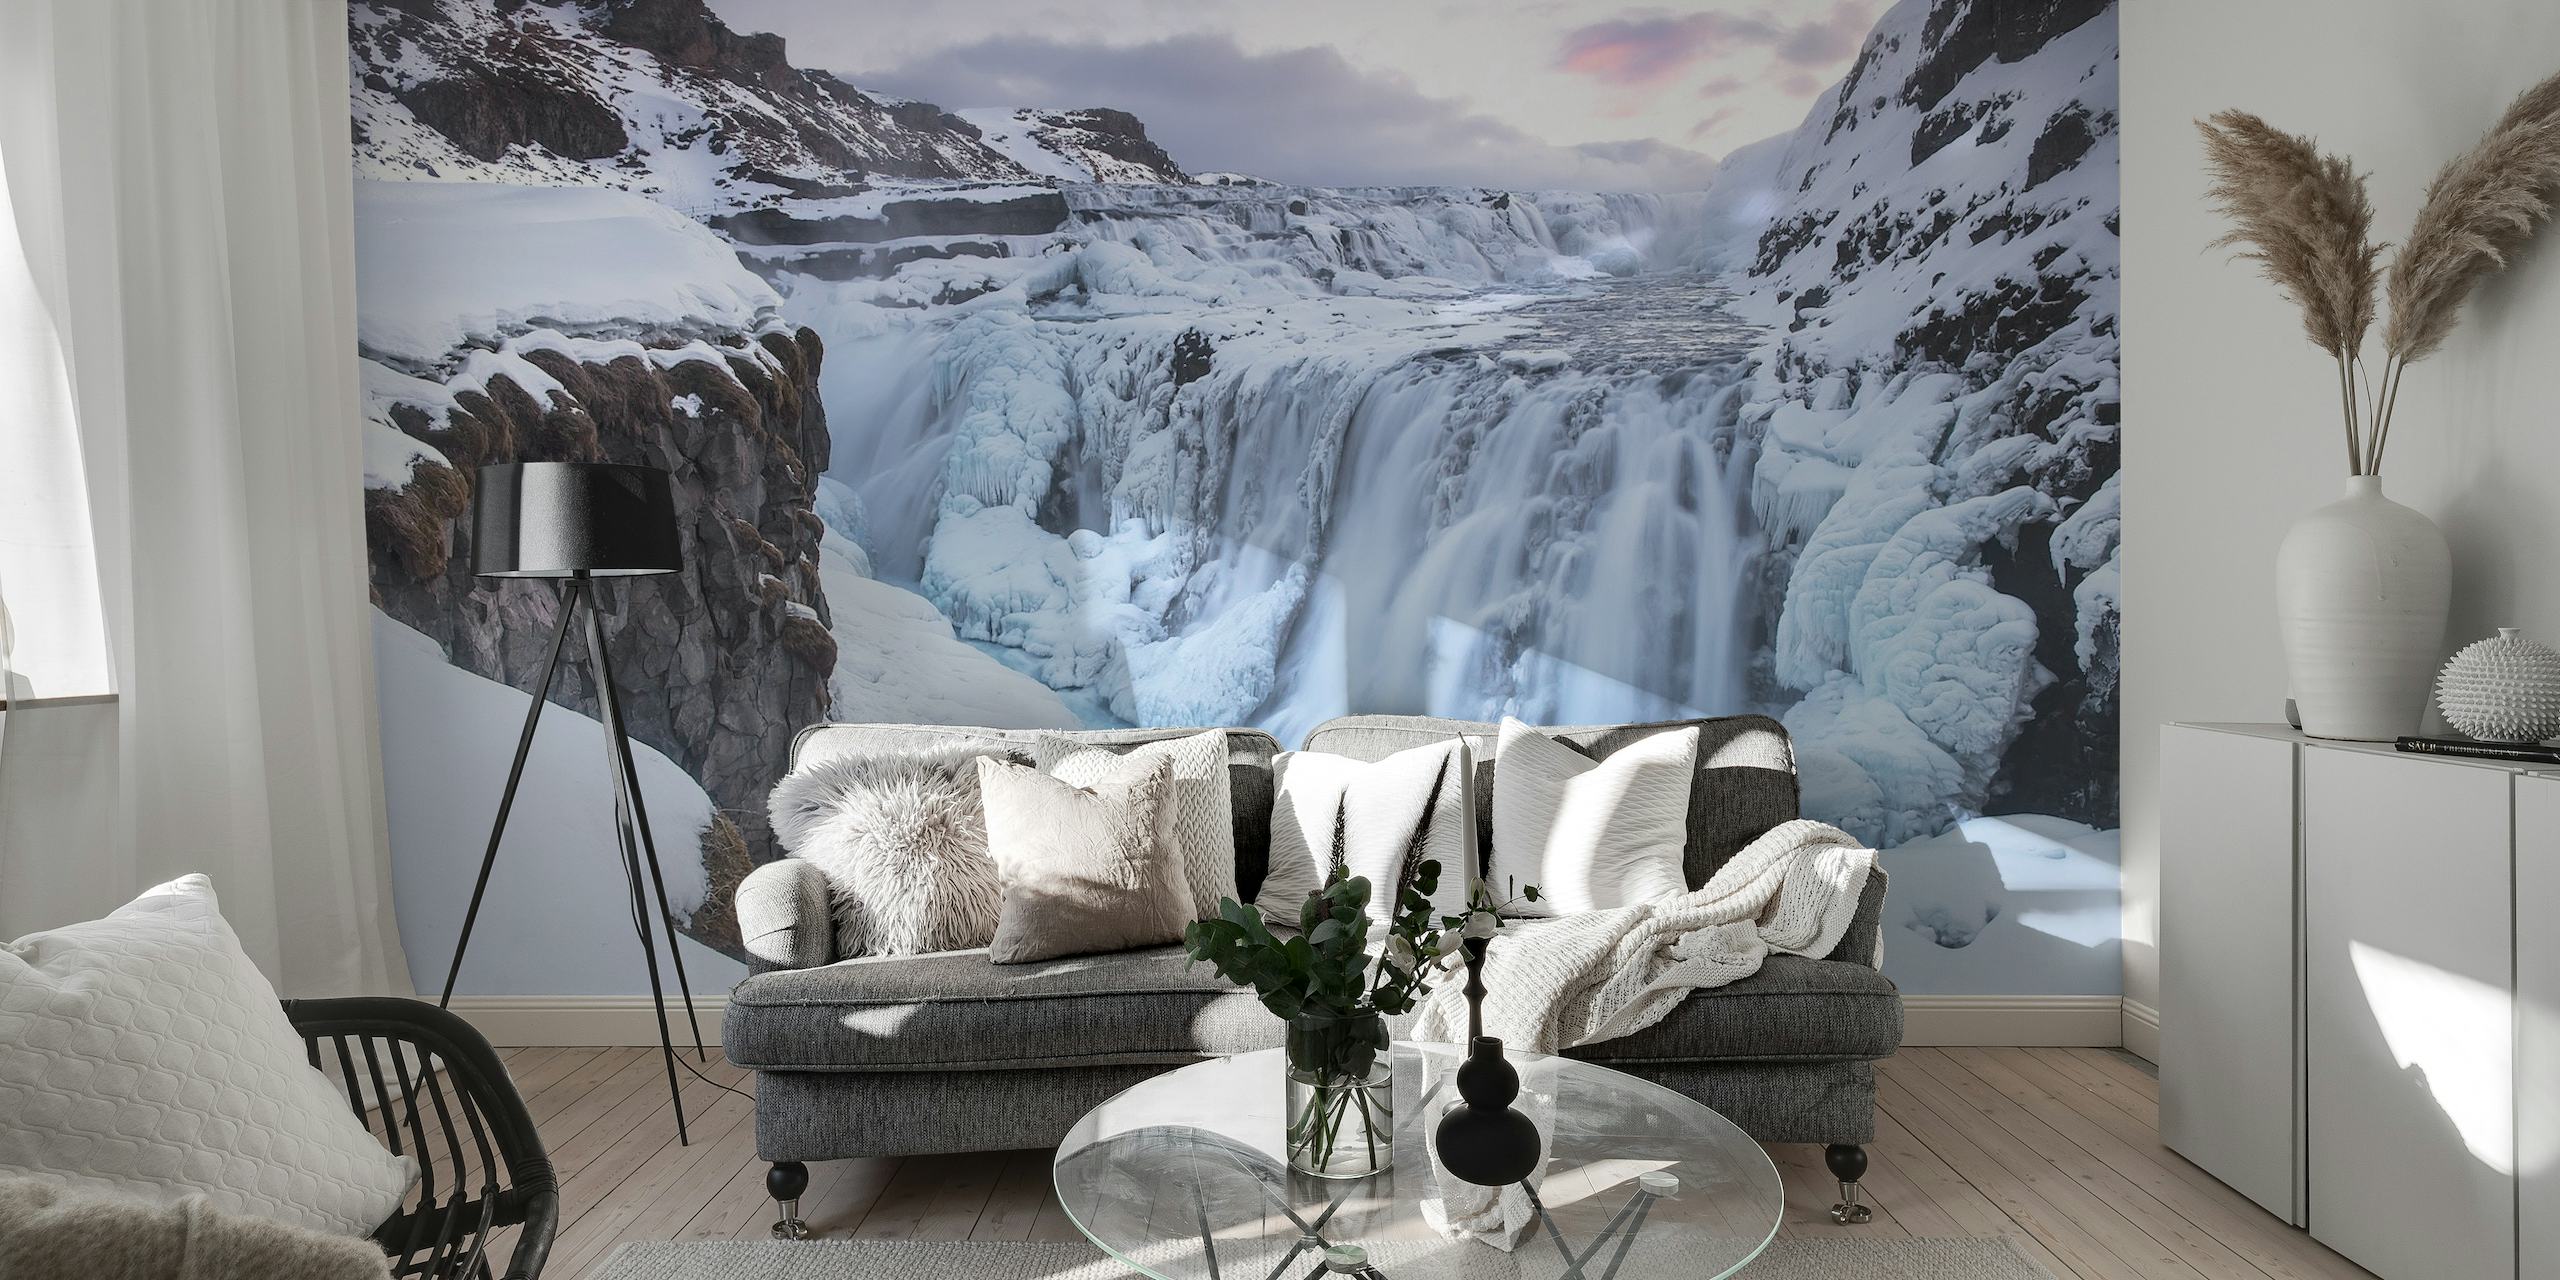 Frozen waterfall wall mural with snowy cliffs and icy blues